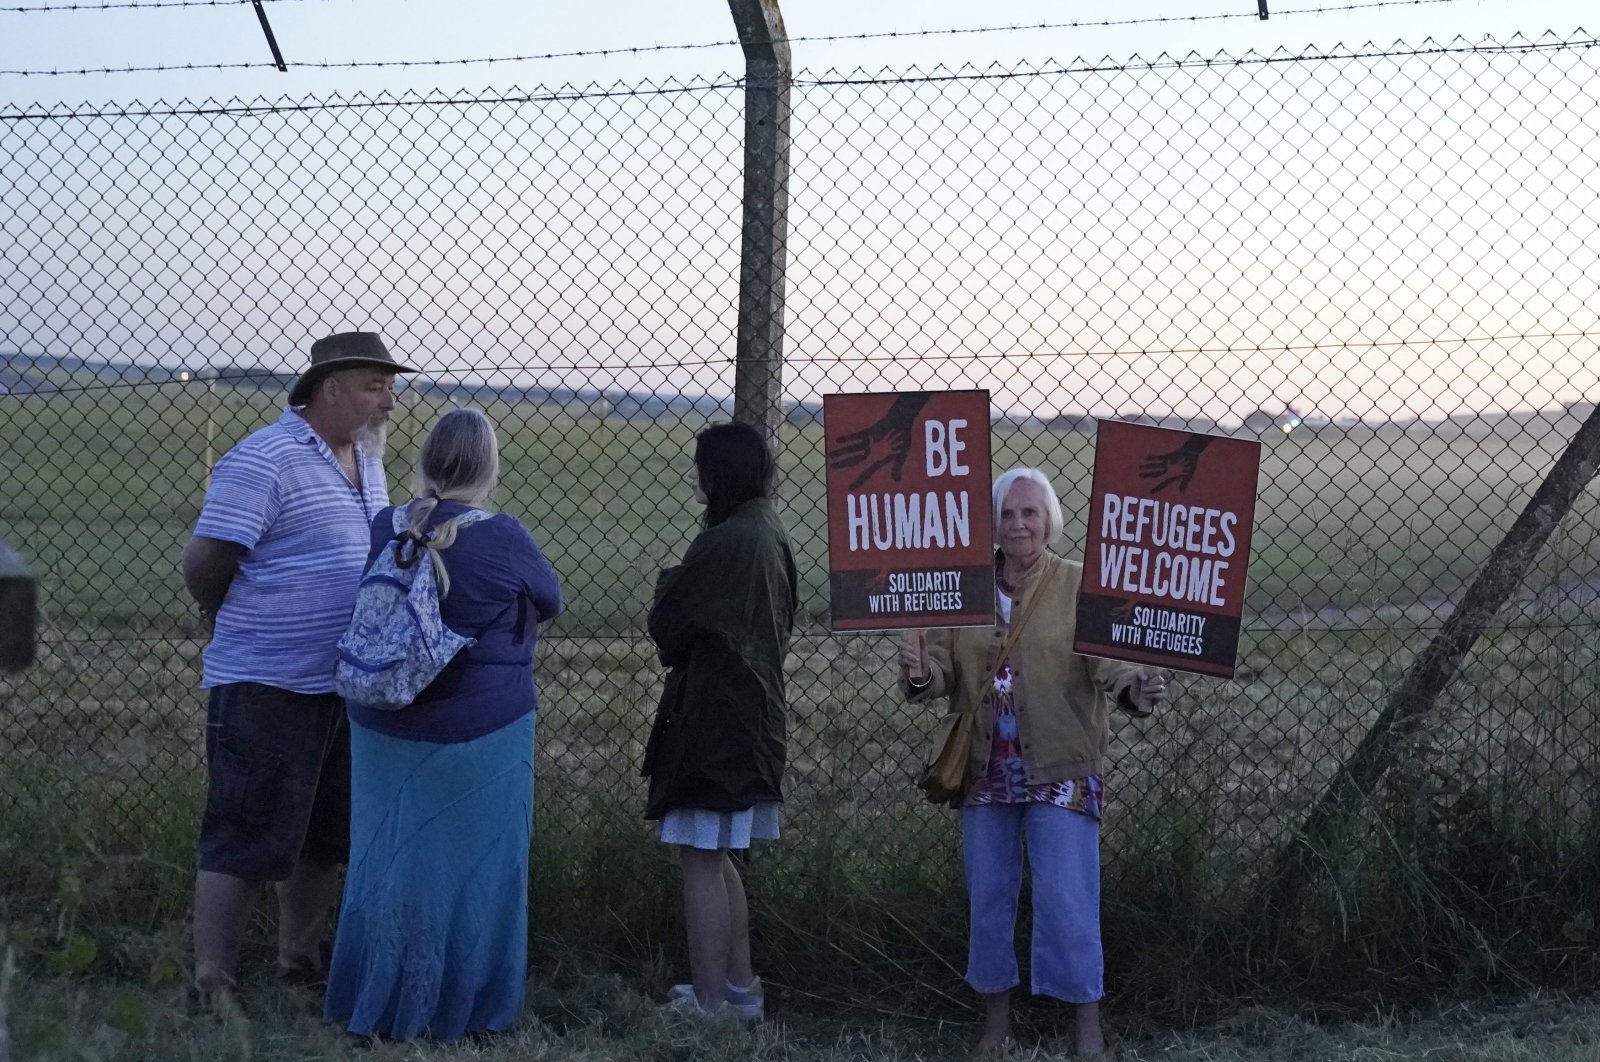 Protesters gather at the perimeter of Boscombe Down air base in Amesbury where the aircraft believed to be the plane set to take asylum-seekers to Rwanda is located, U.K., June 14, 2022. (PA via AP)